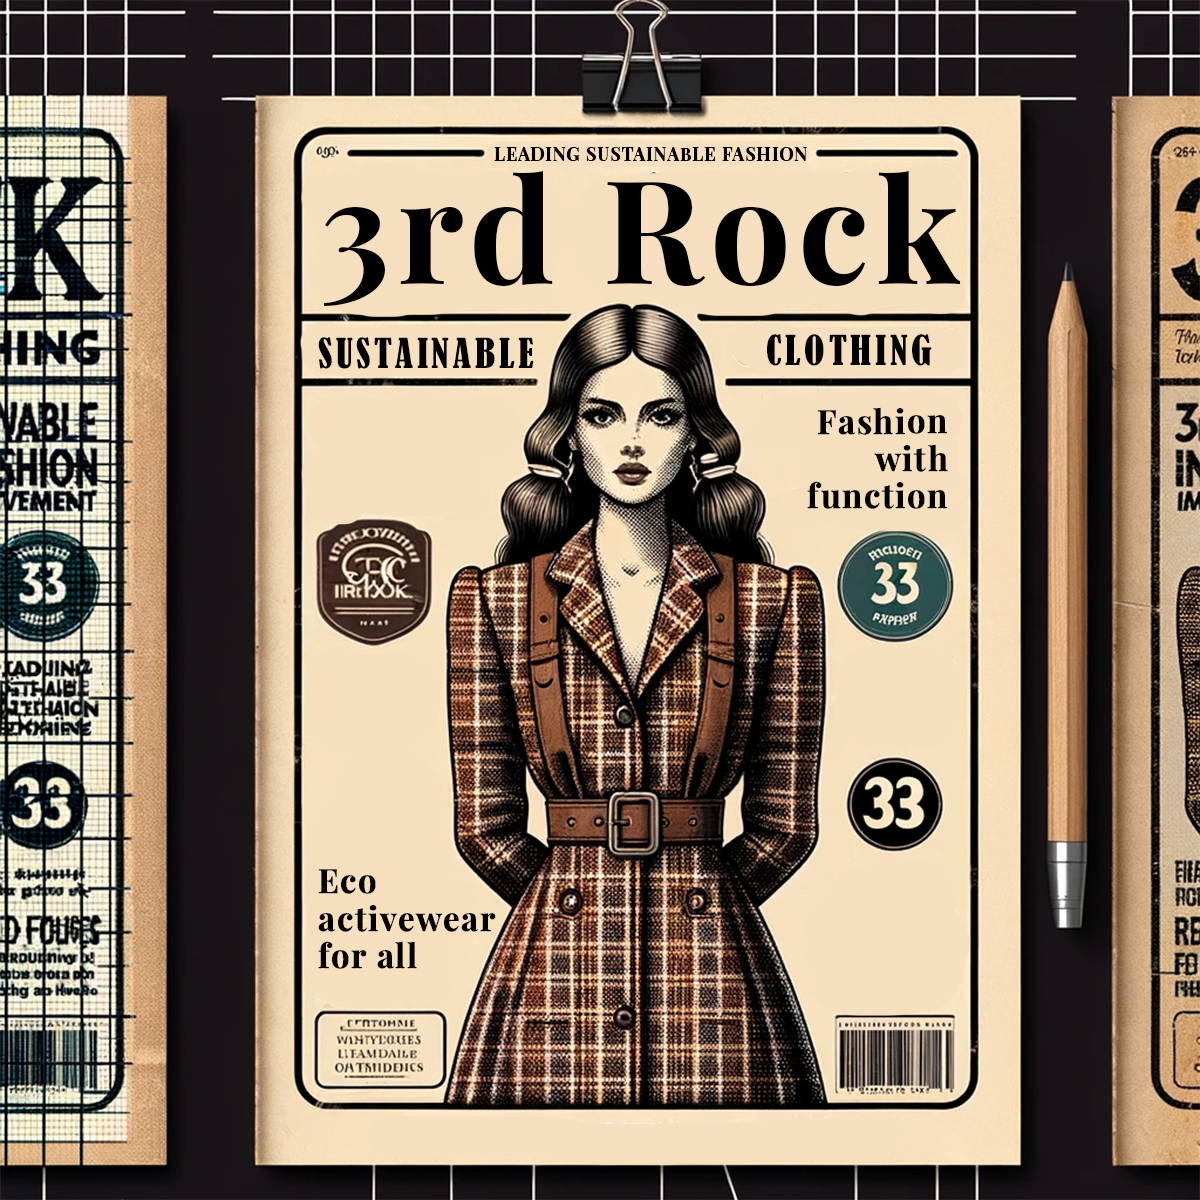 We spun up what a vintage 3RD ROCK magazine could look like. Focussing on our sustainability of course. 